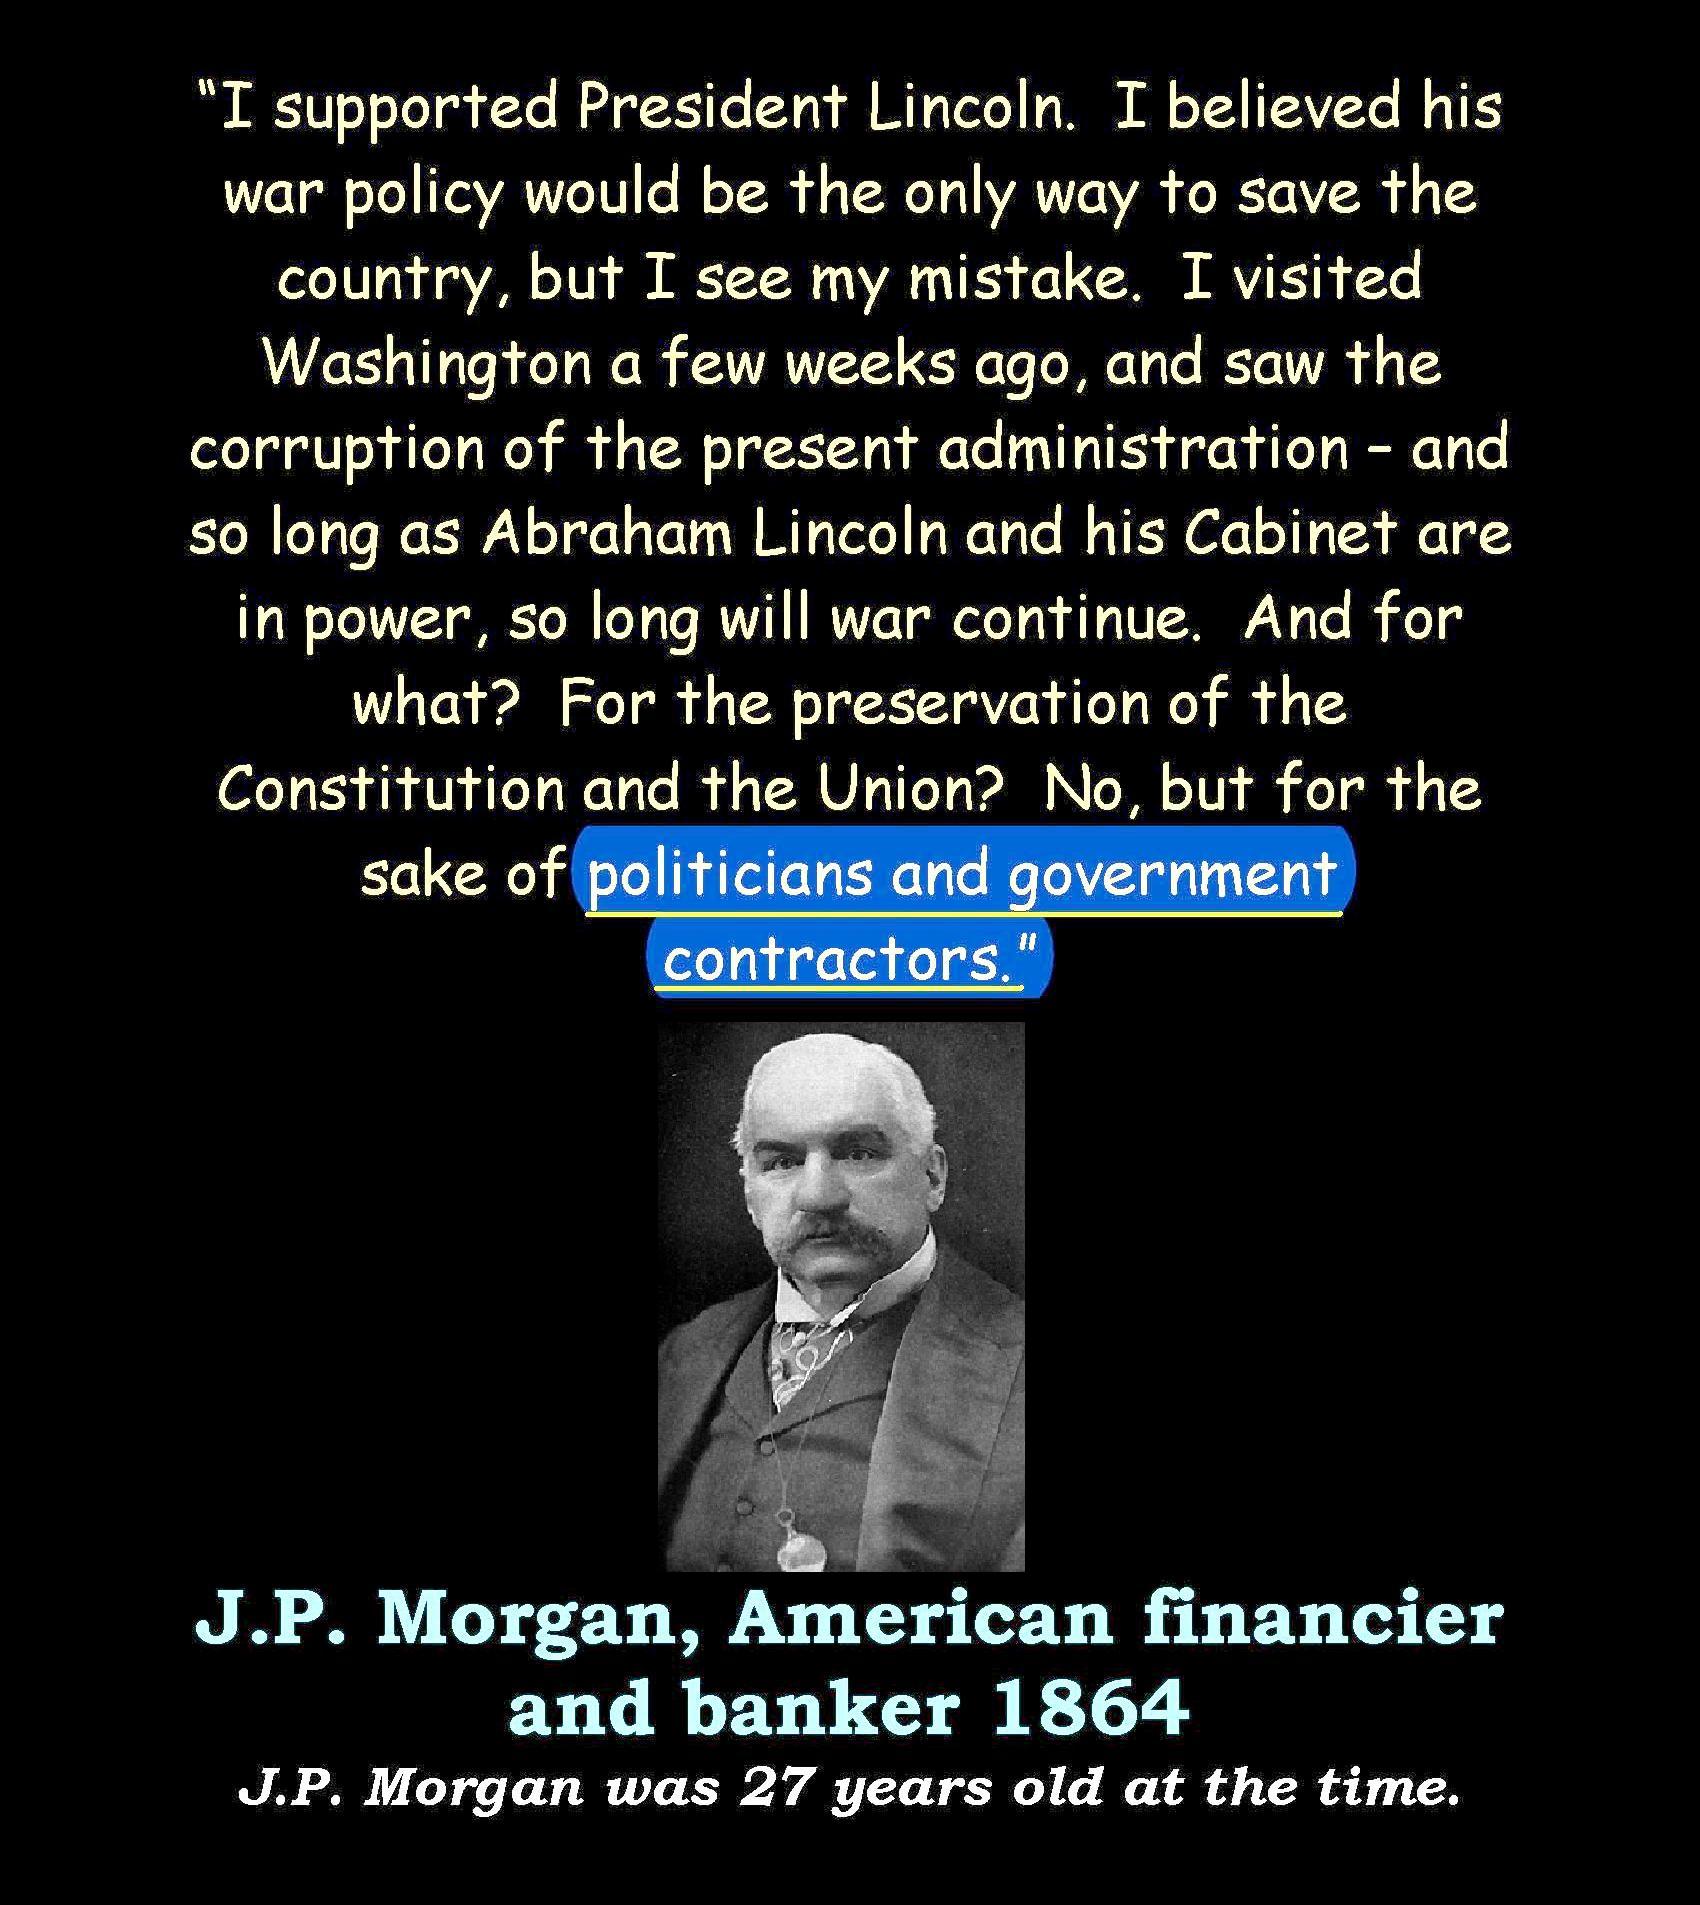 J.P. Morgan was 27 years old at the time__